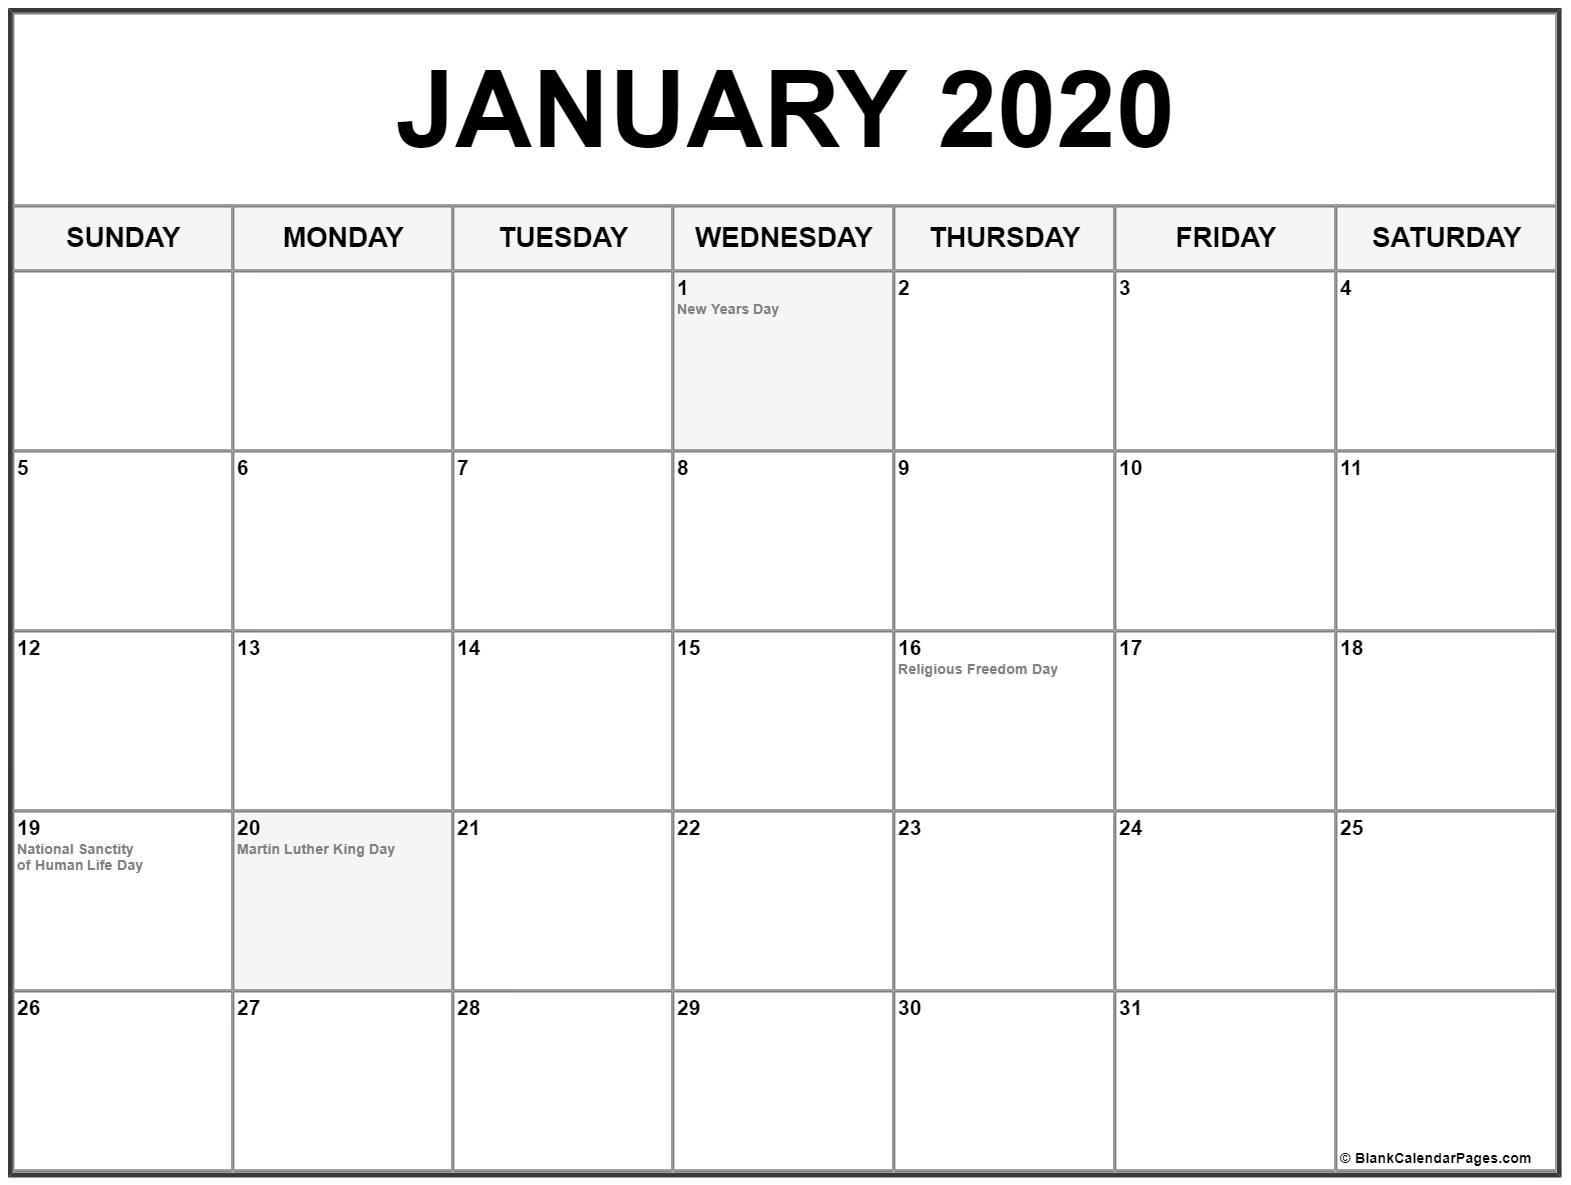 Collection Of January 2020 Calendars With Holidays 2020 Calendar Holidays Easter